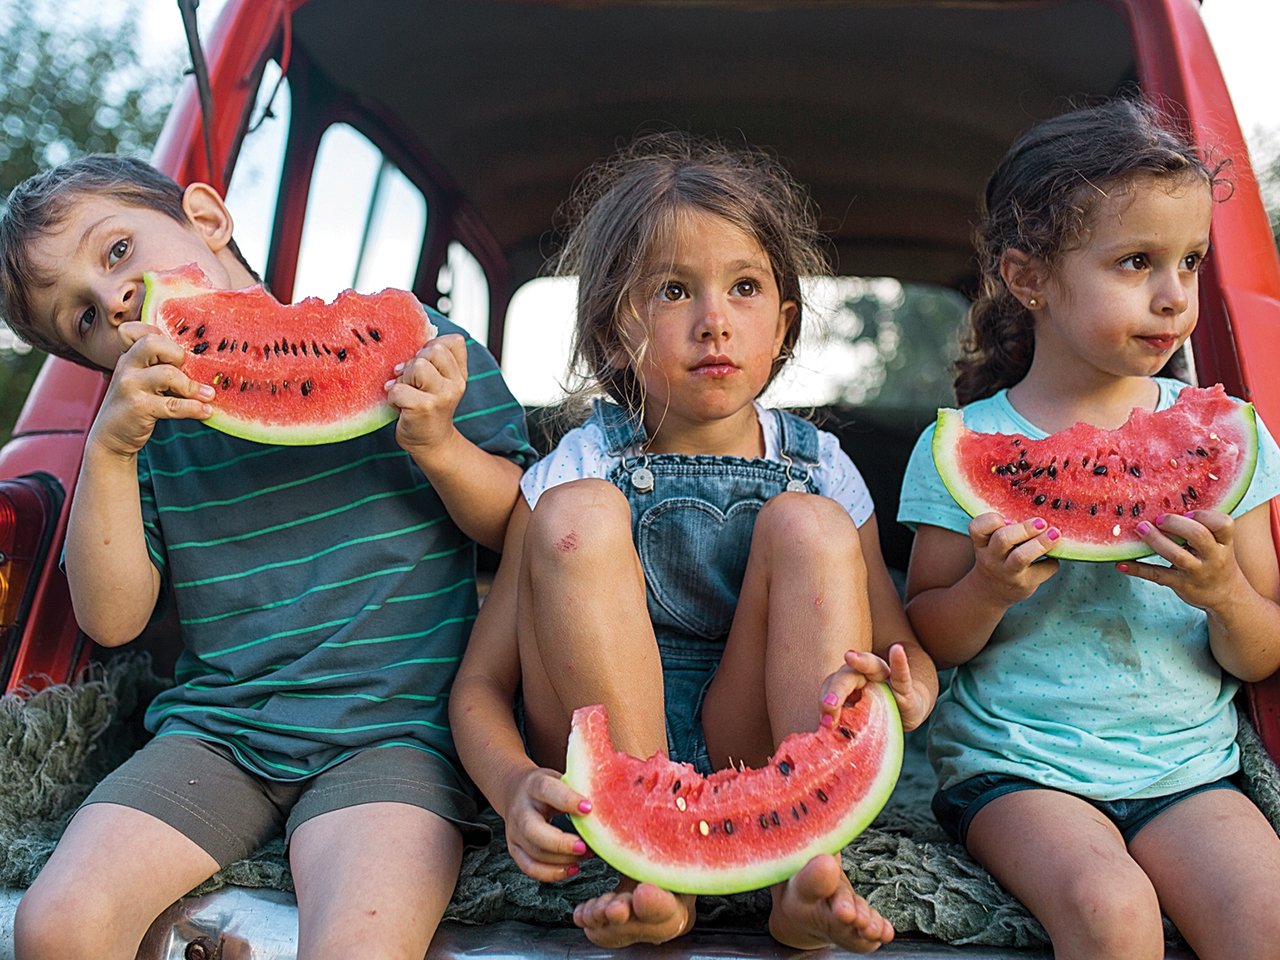 Three kids eating watermelon in the trunk of a car